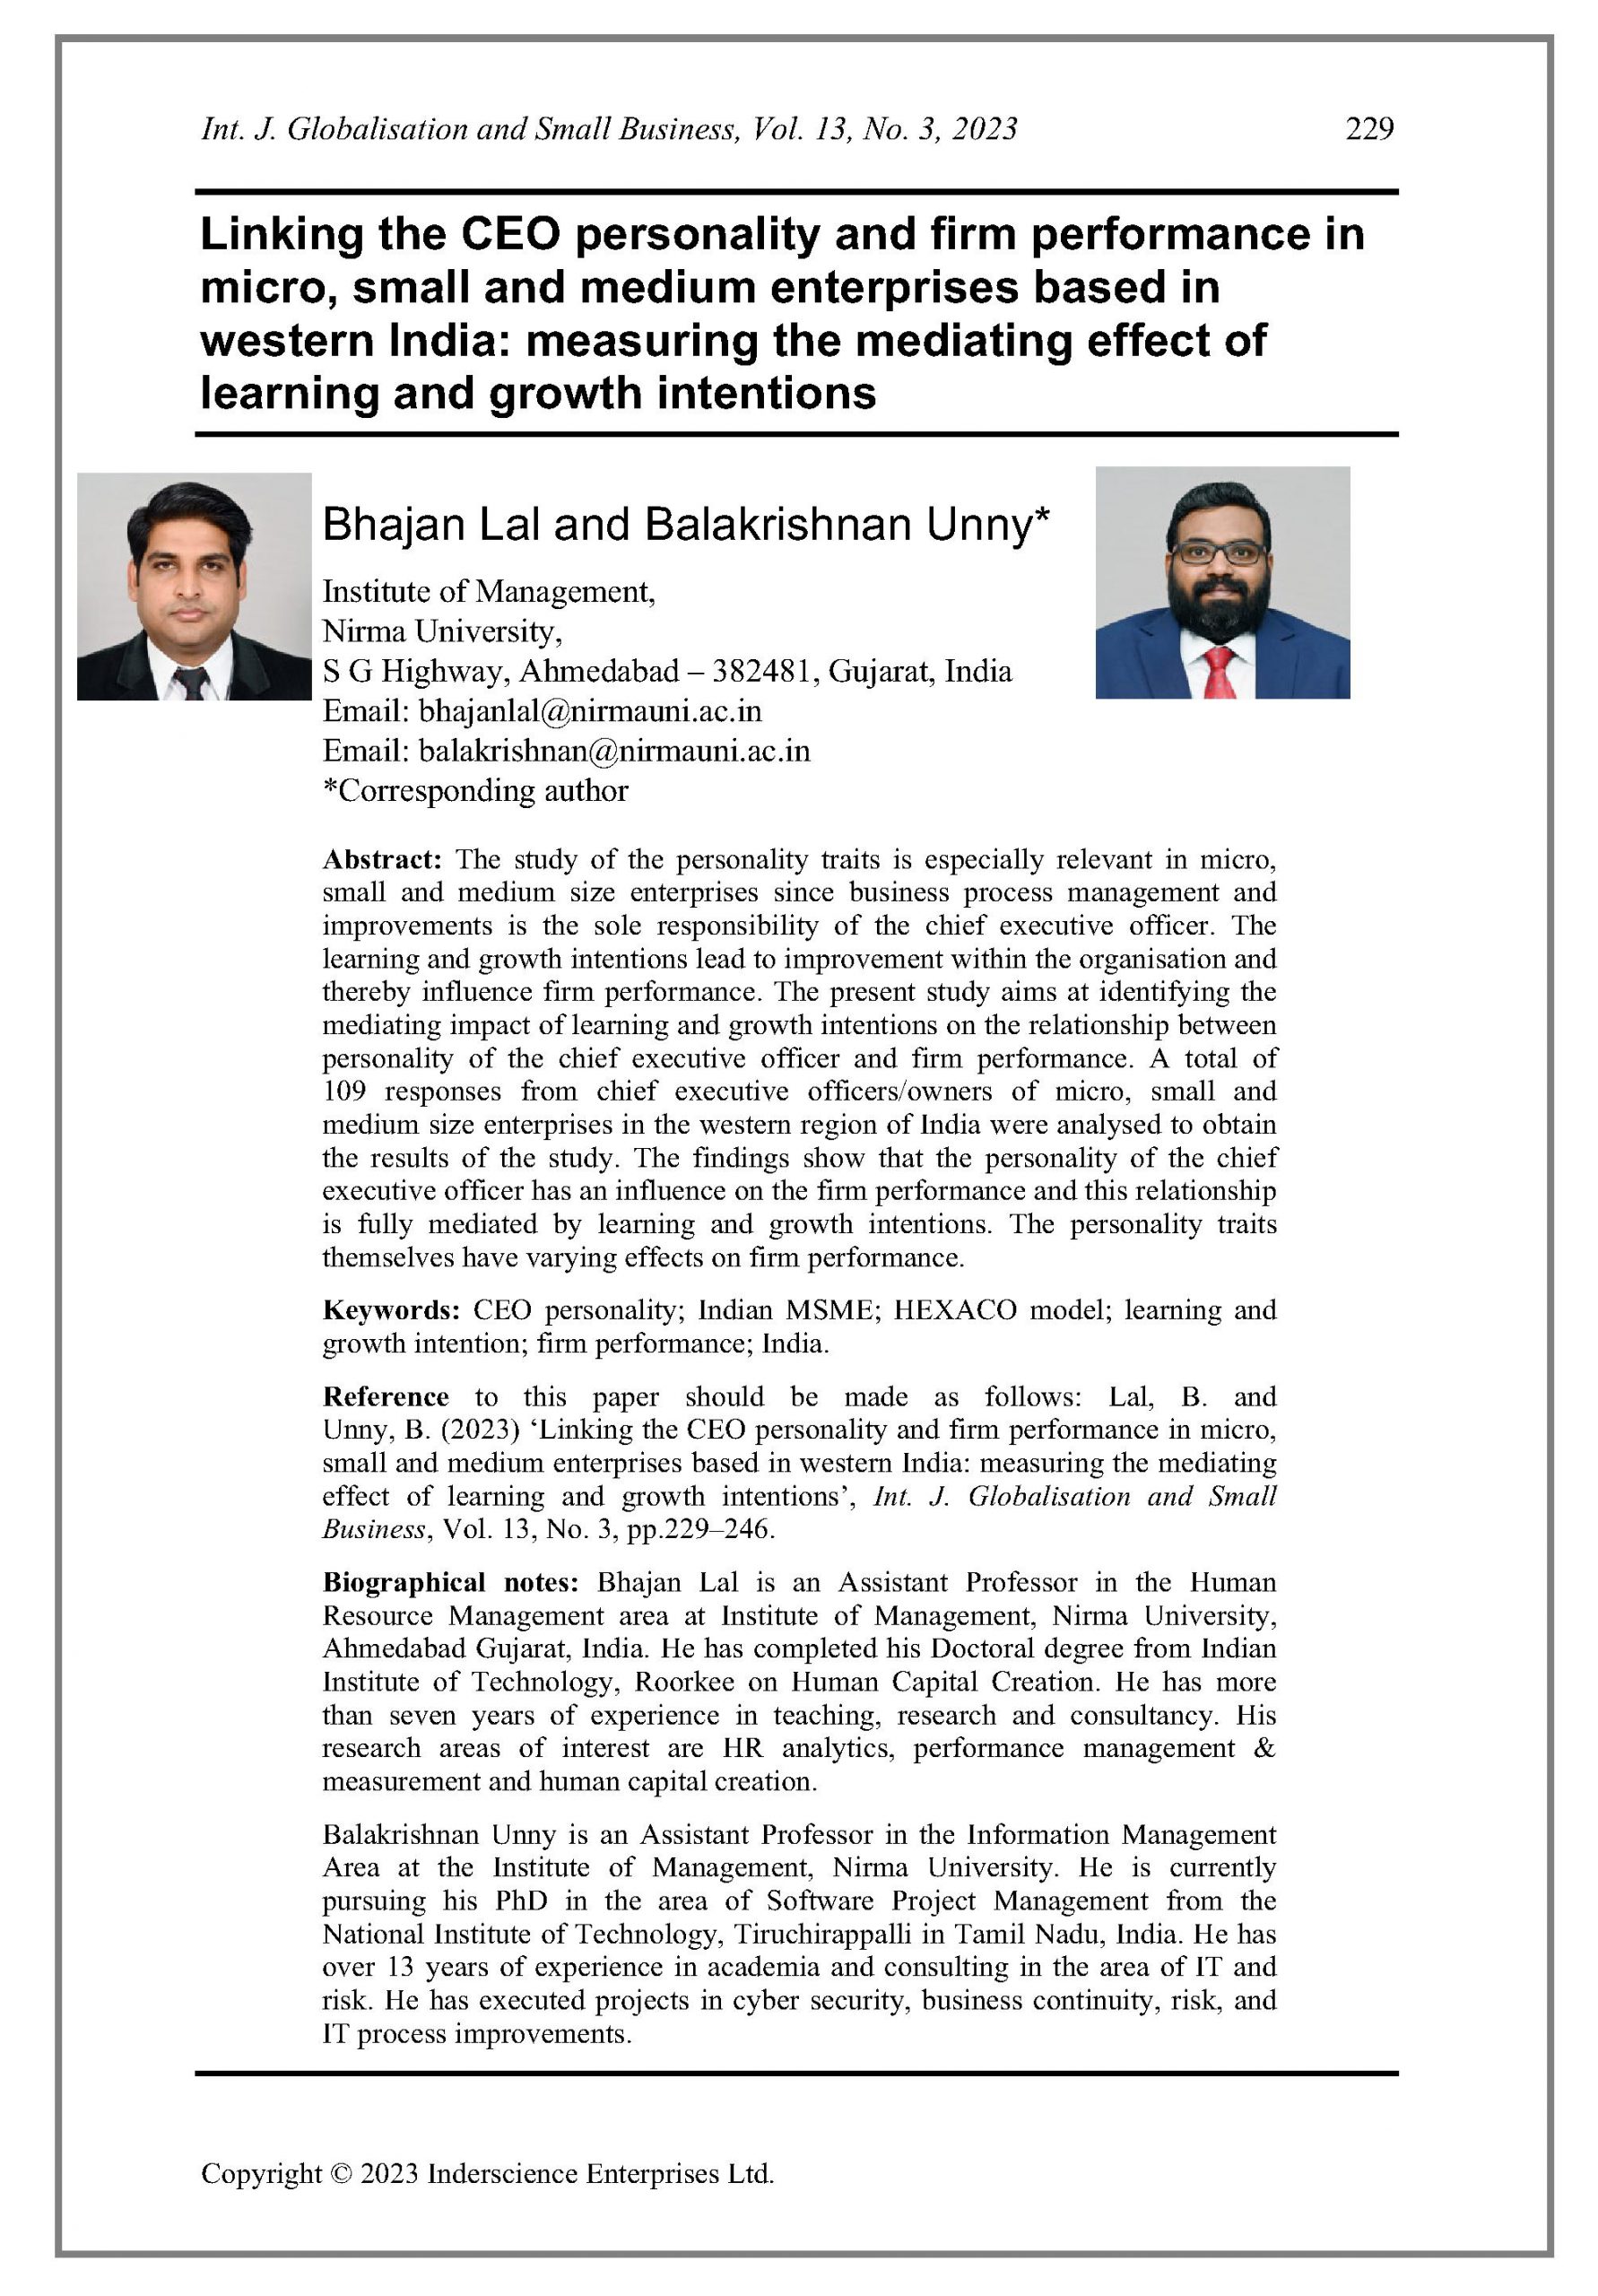 Linking the CEO personality and firm performance in micro, small and medium enterprises based in western India: measuring the mediating effect of learning and growth intentions